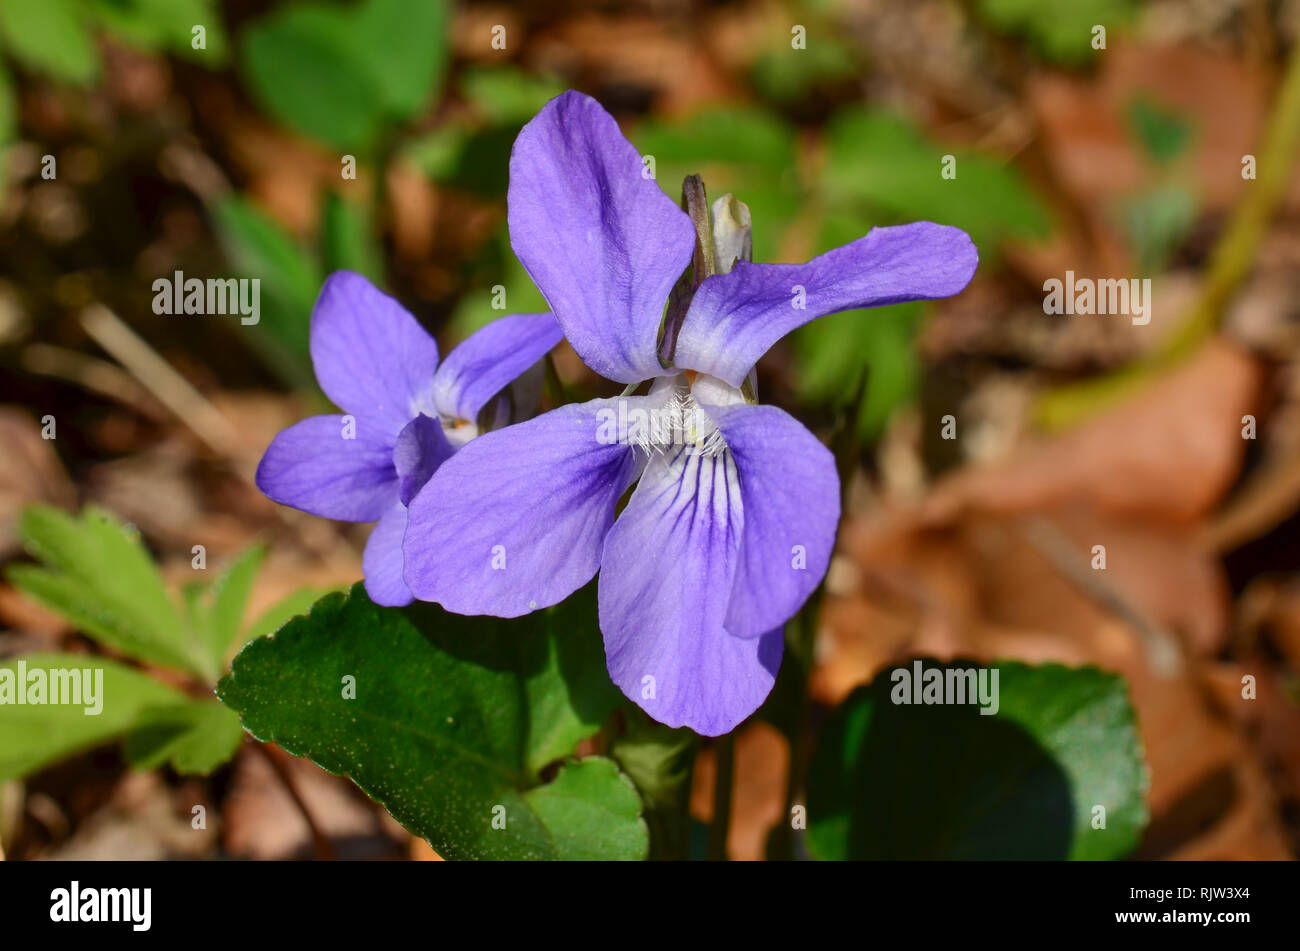 Close up shot of violets flowers blooming in spring meadow Stock Photo